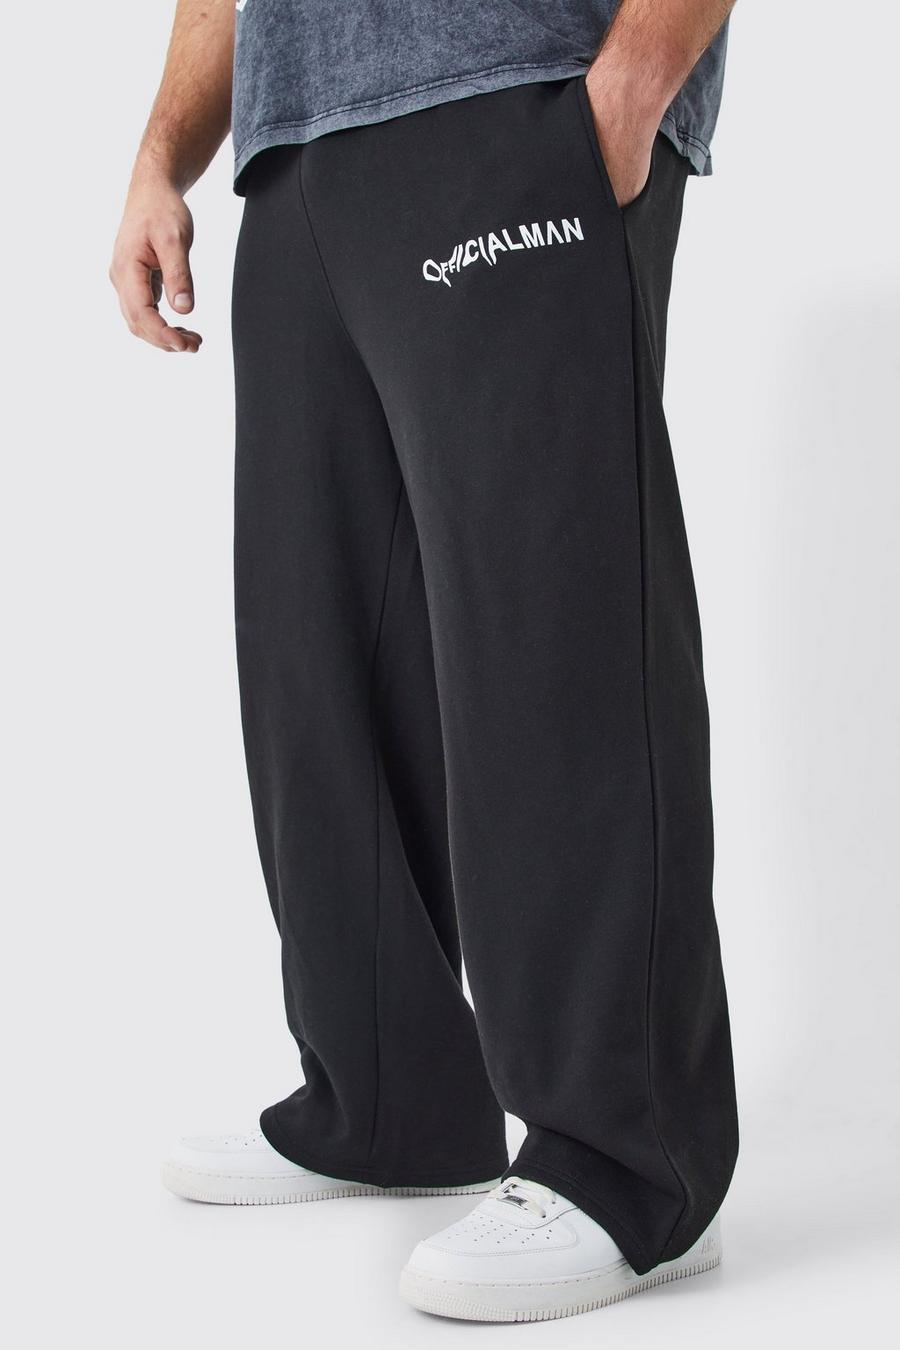 Plus Relaxed Official Man Jogger In Black